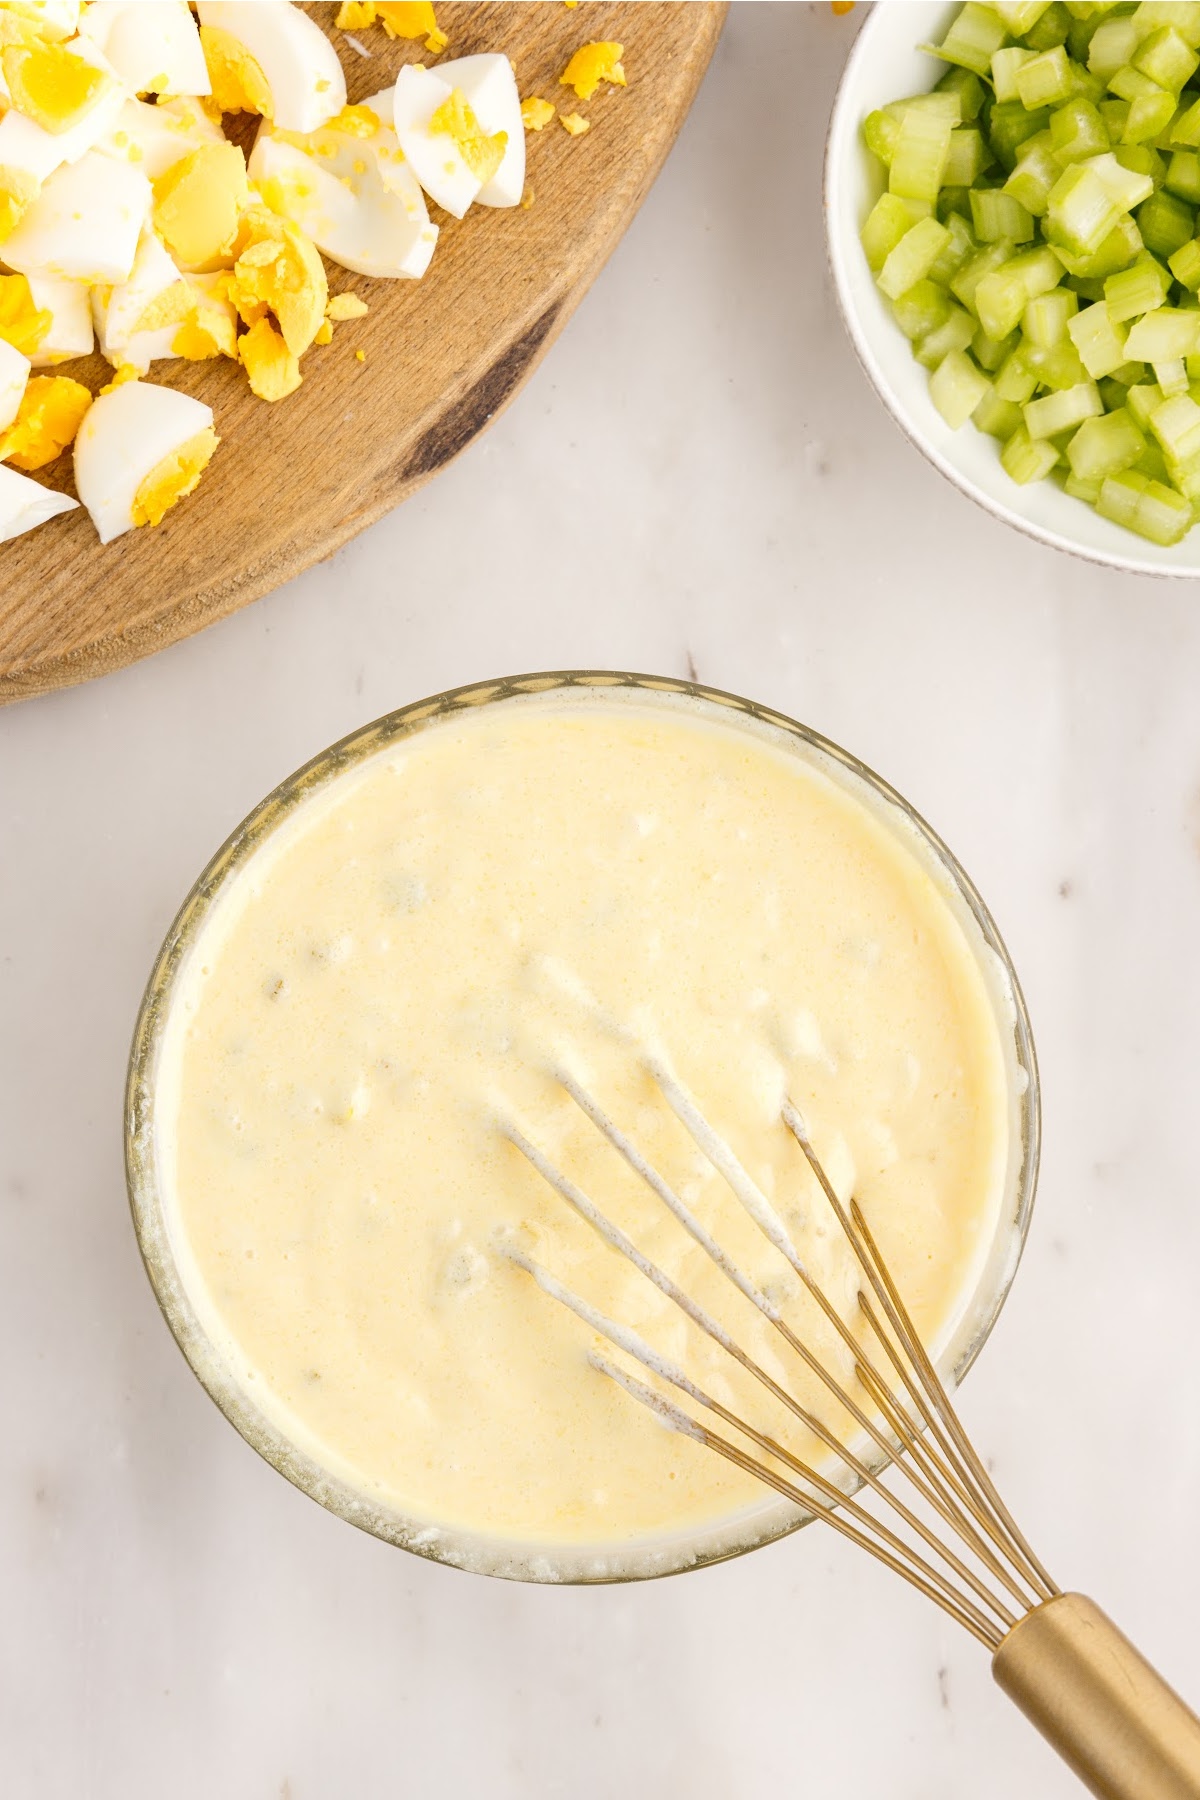 Amish Macaroni Salad dressing in a dish with a whisk inserted.